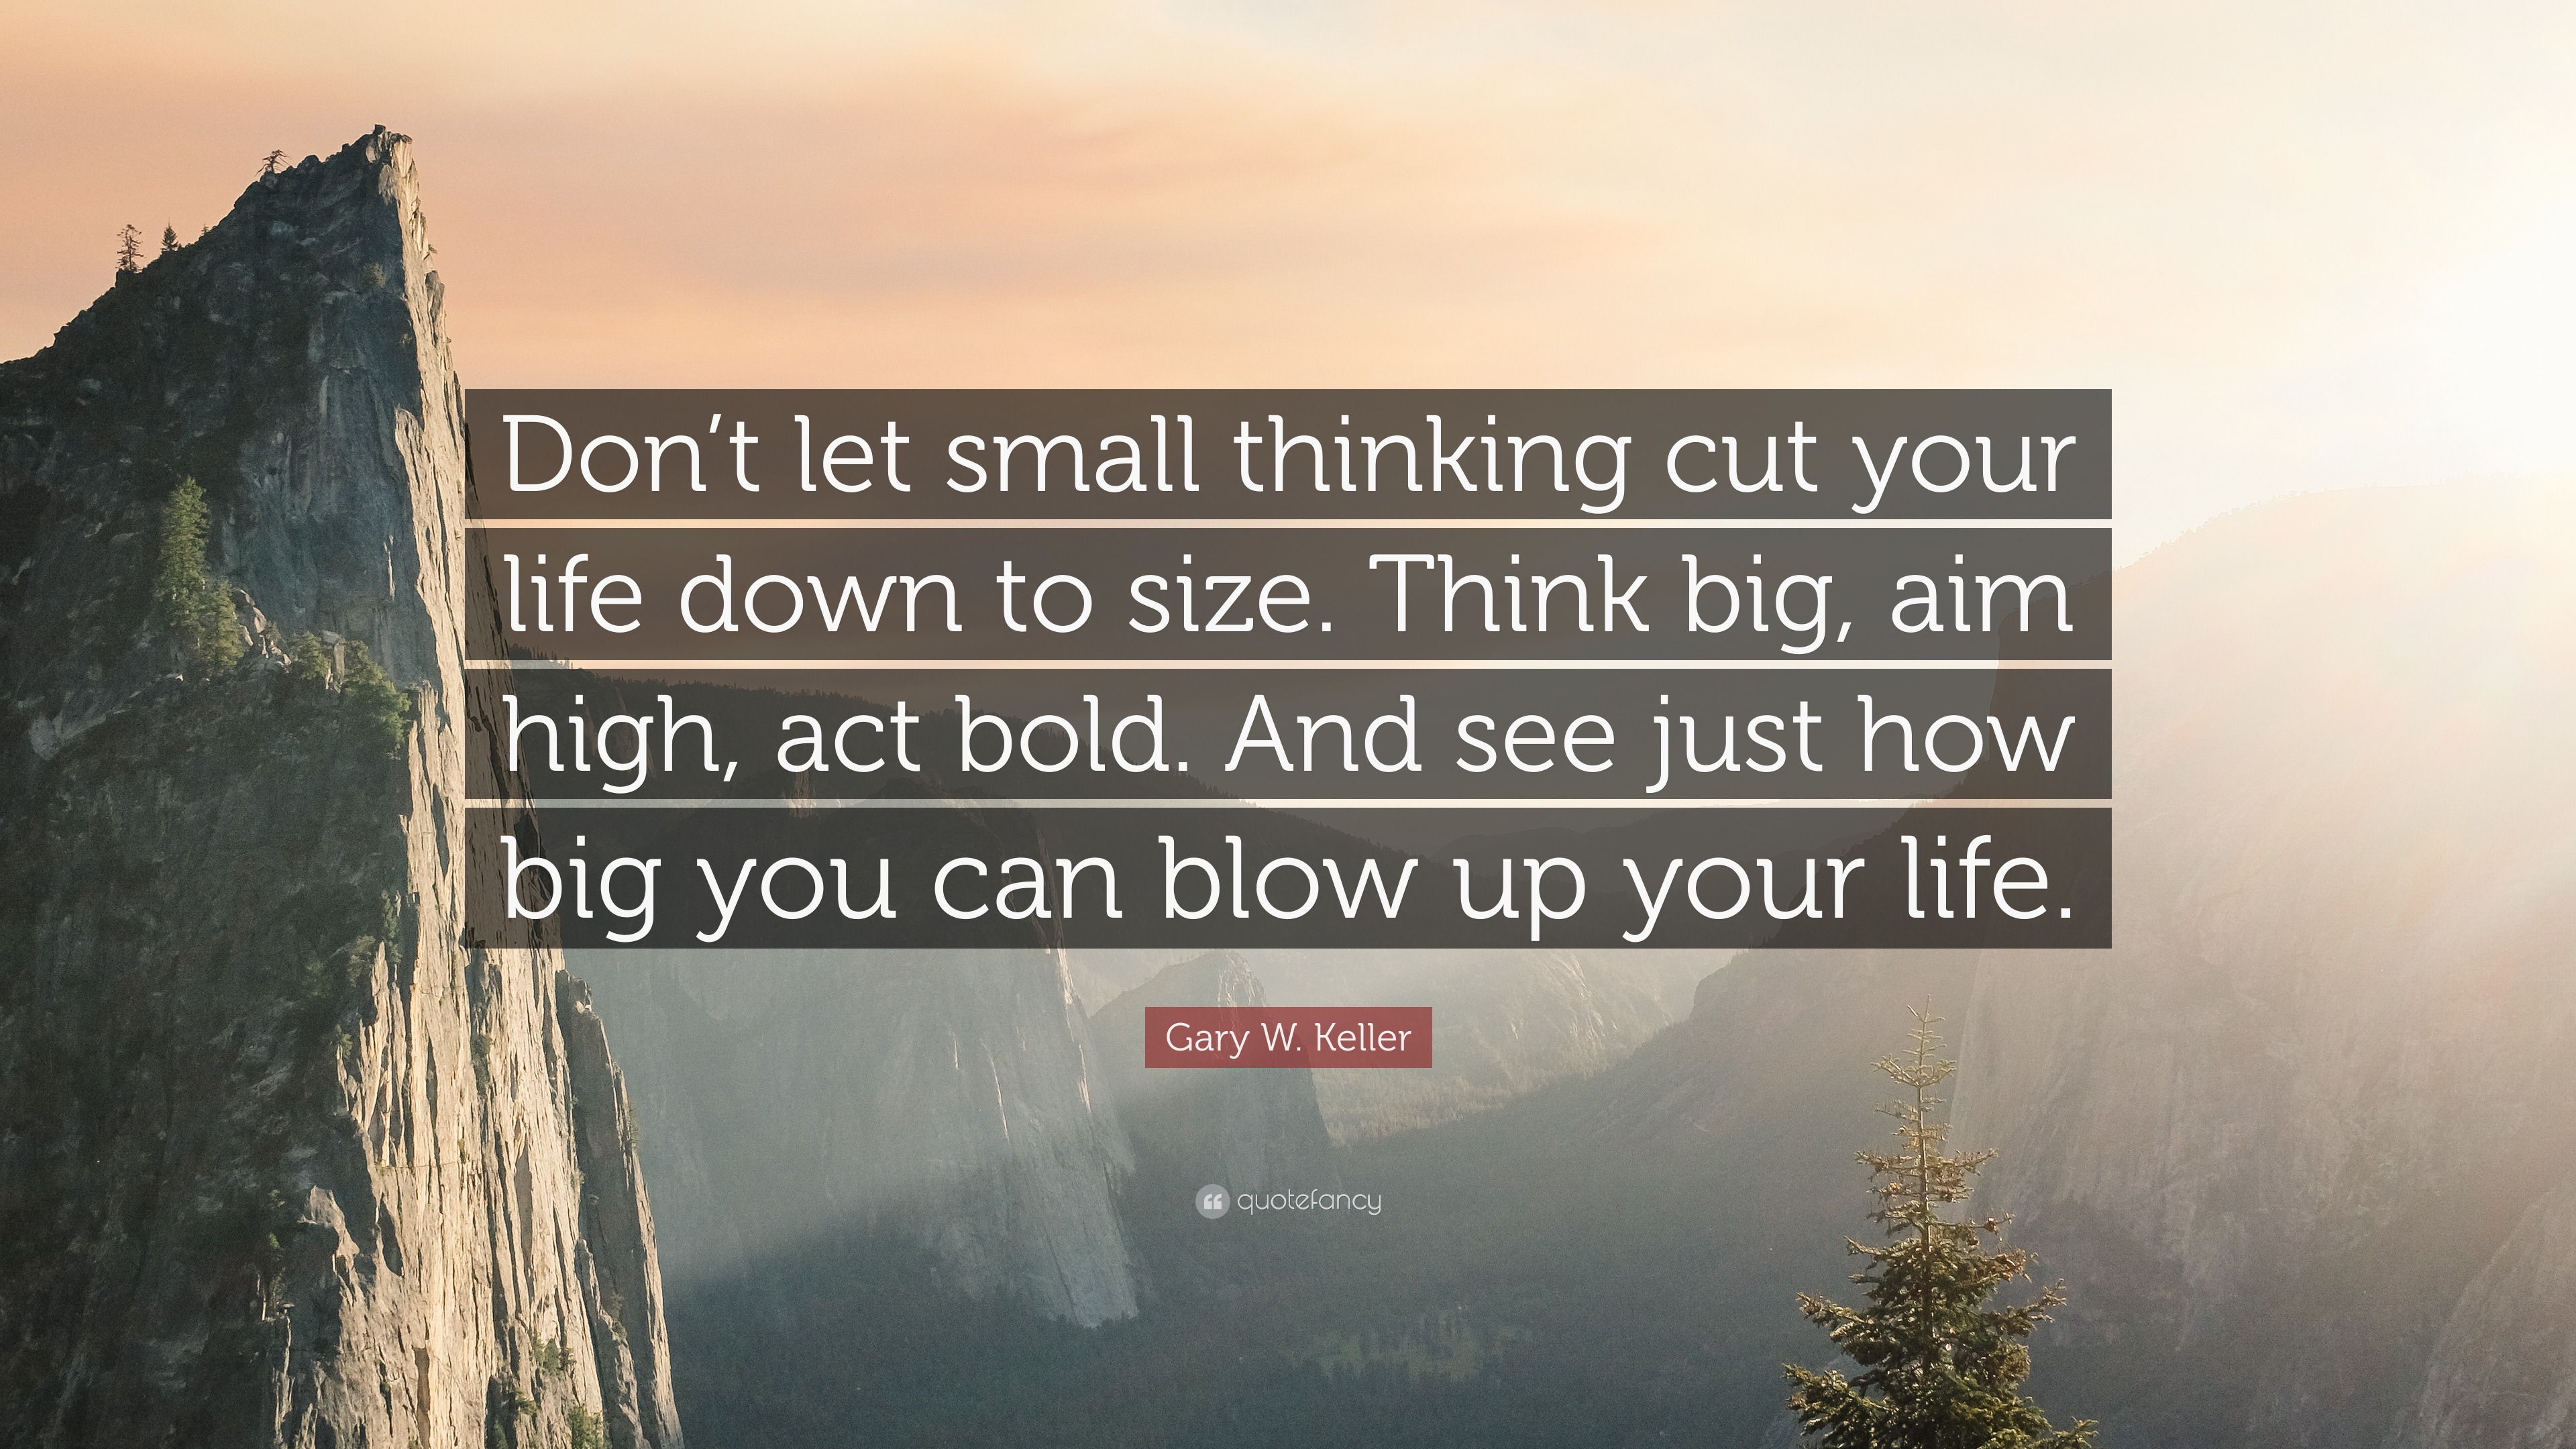 Gary W. Keller Quote: “Don't let small thinking cut your life down